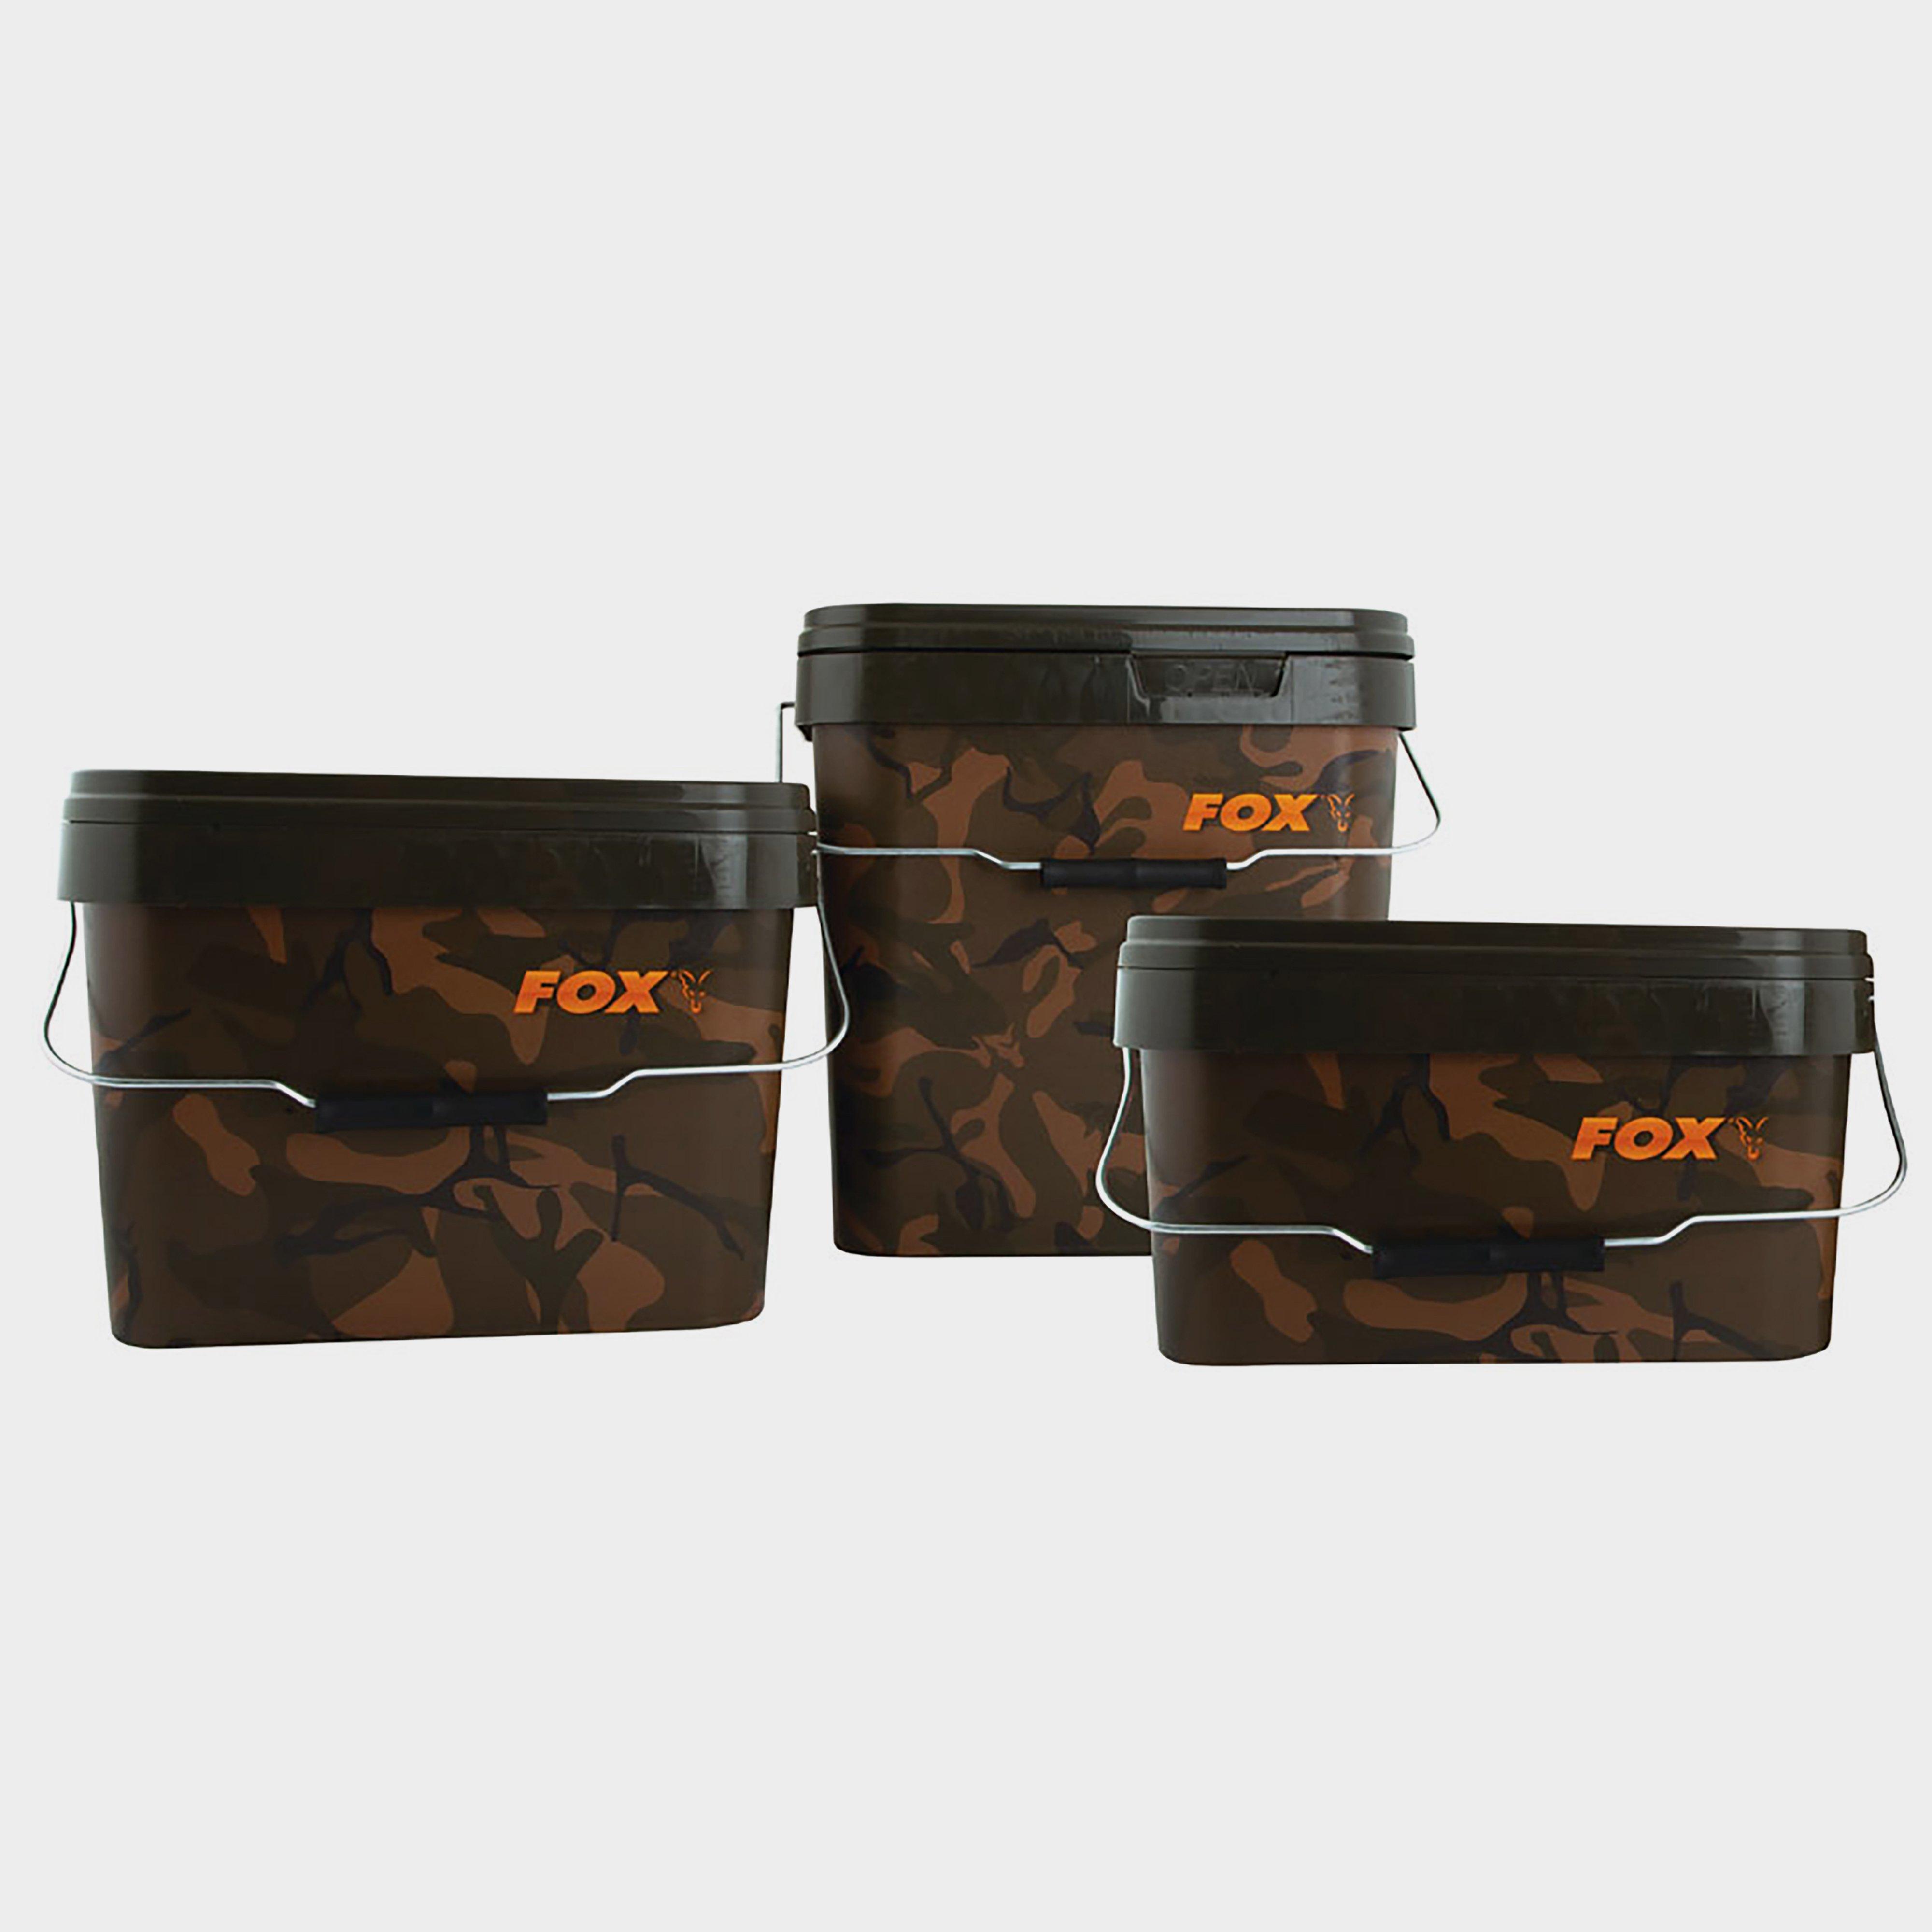 Photos - Other for Fishing Fox INTERNATIONAL Camo Square Bucket 17 Litre, Green 